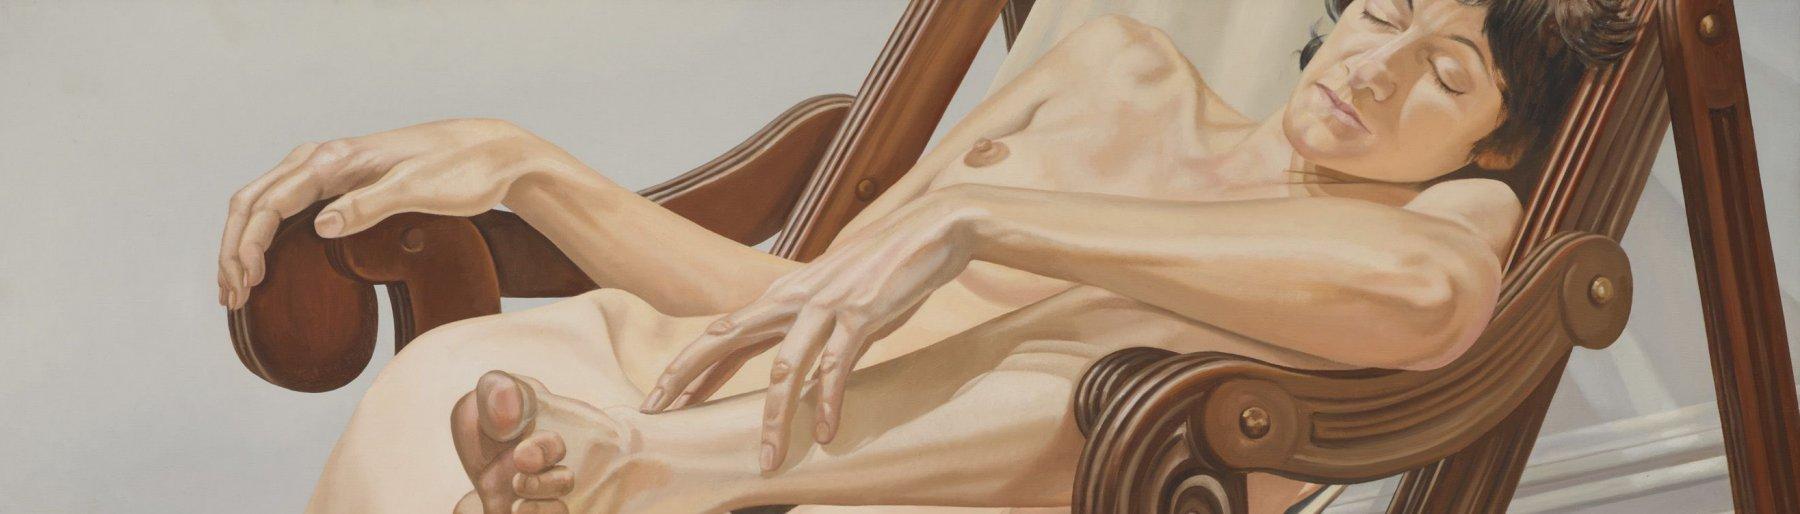 Philip Pearlstein: Figures, props, objects and other things | Bortolami Gallery